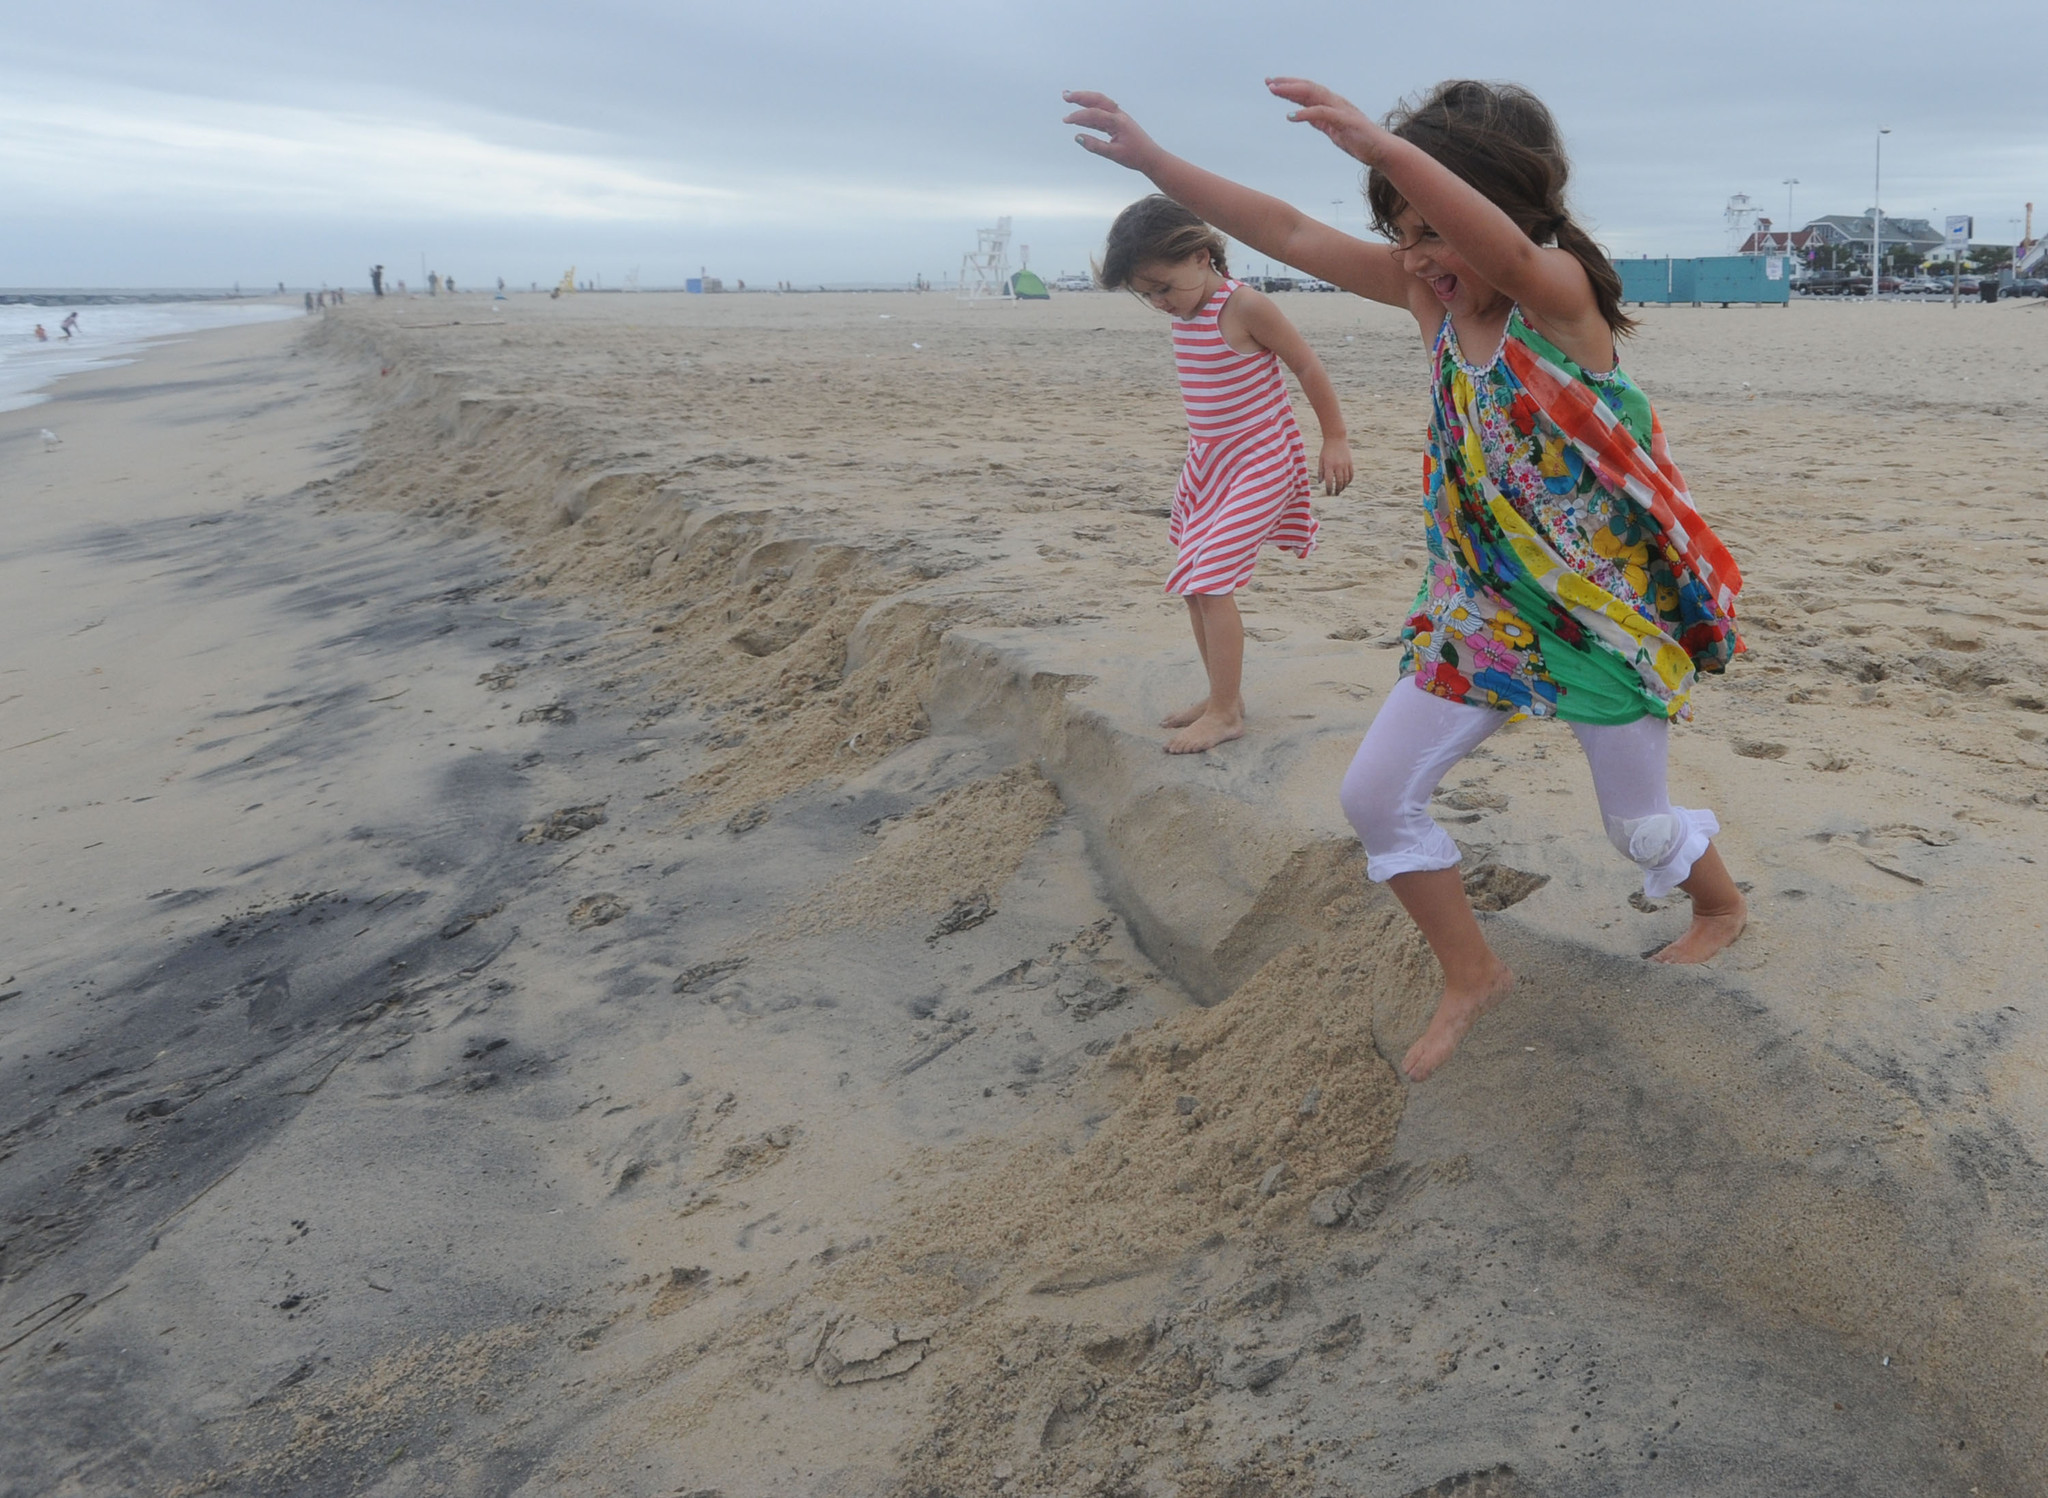 Ocean City, Maryland, beaches have sand cliff thanks to